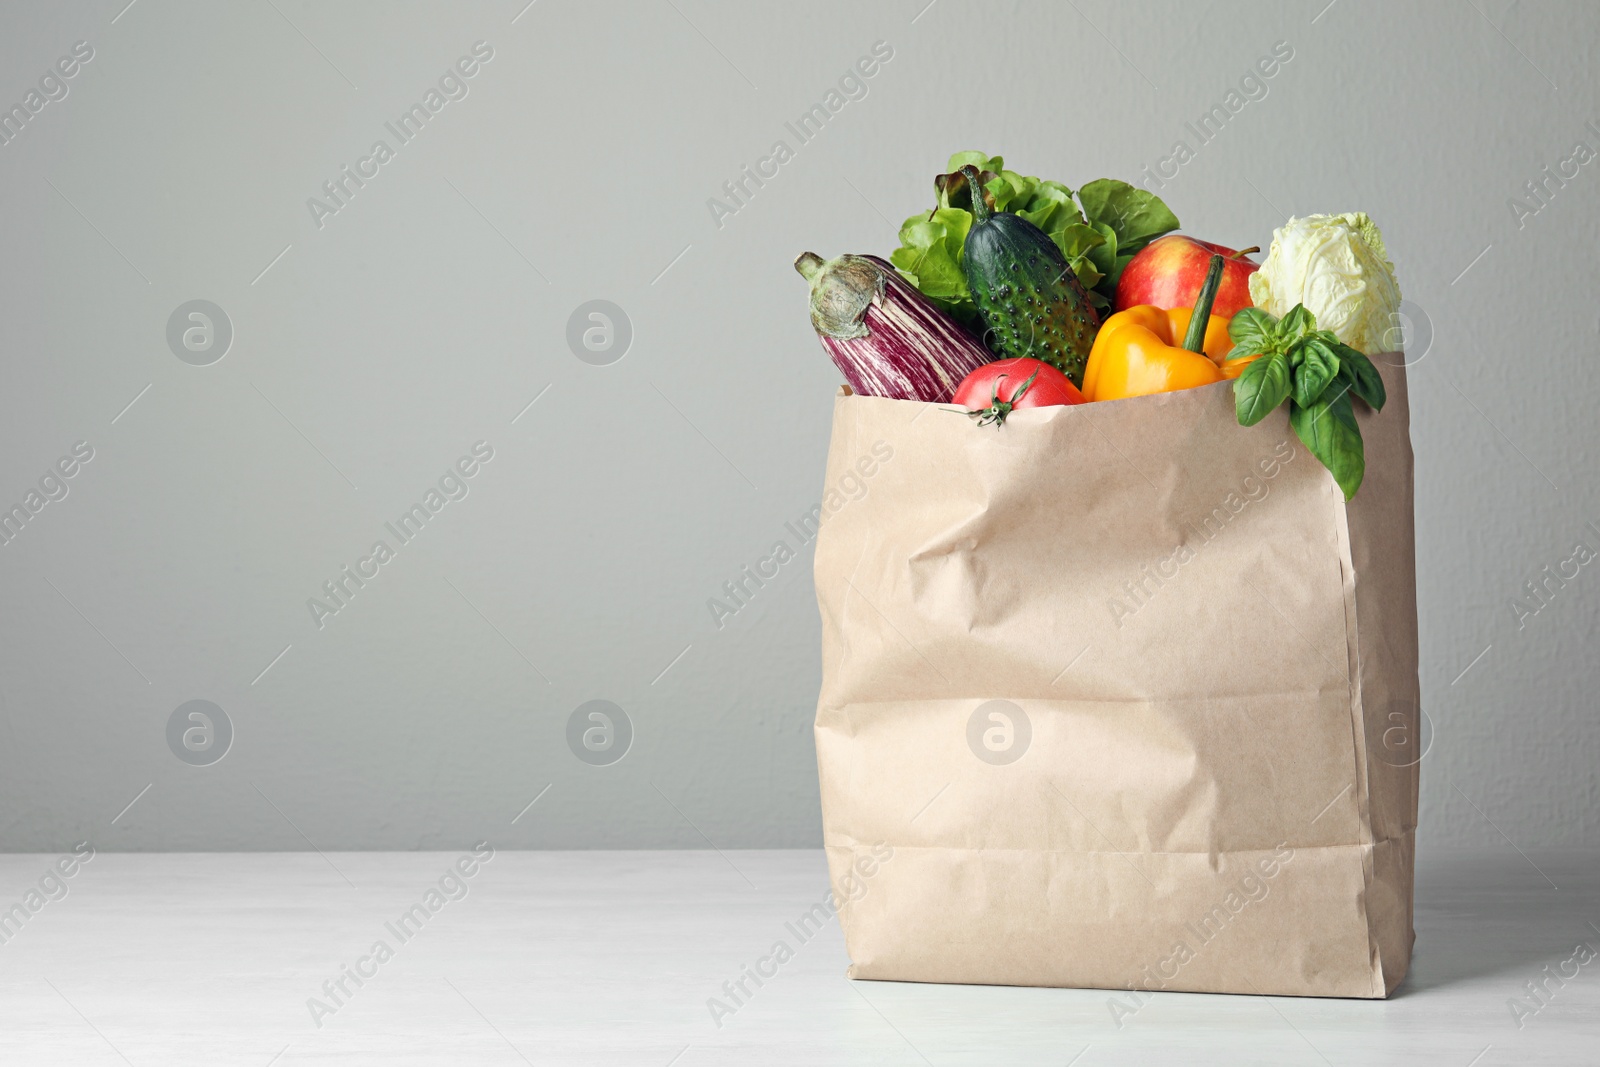 Photo of Paper bag with vegetables on table against grey background. Space for text